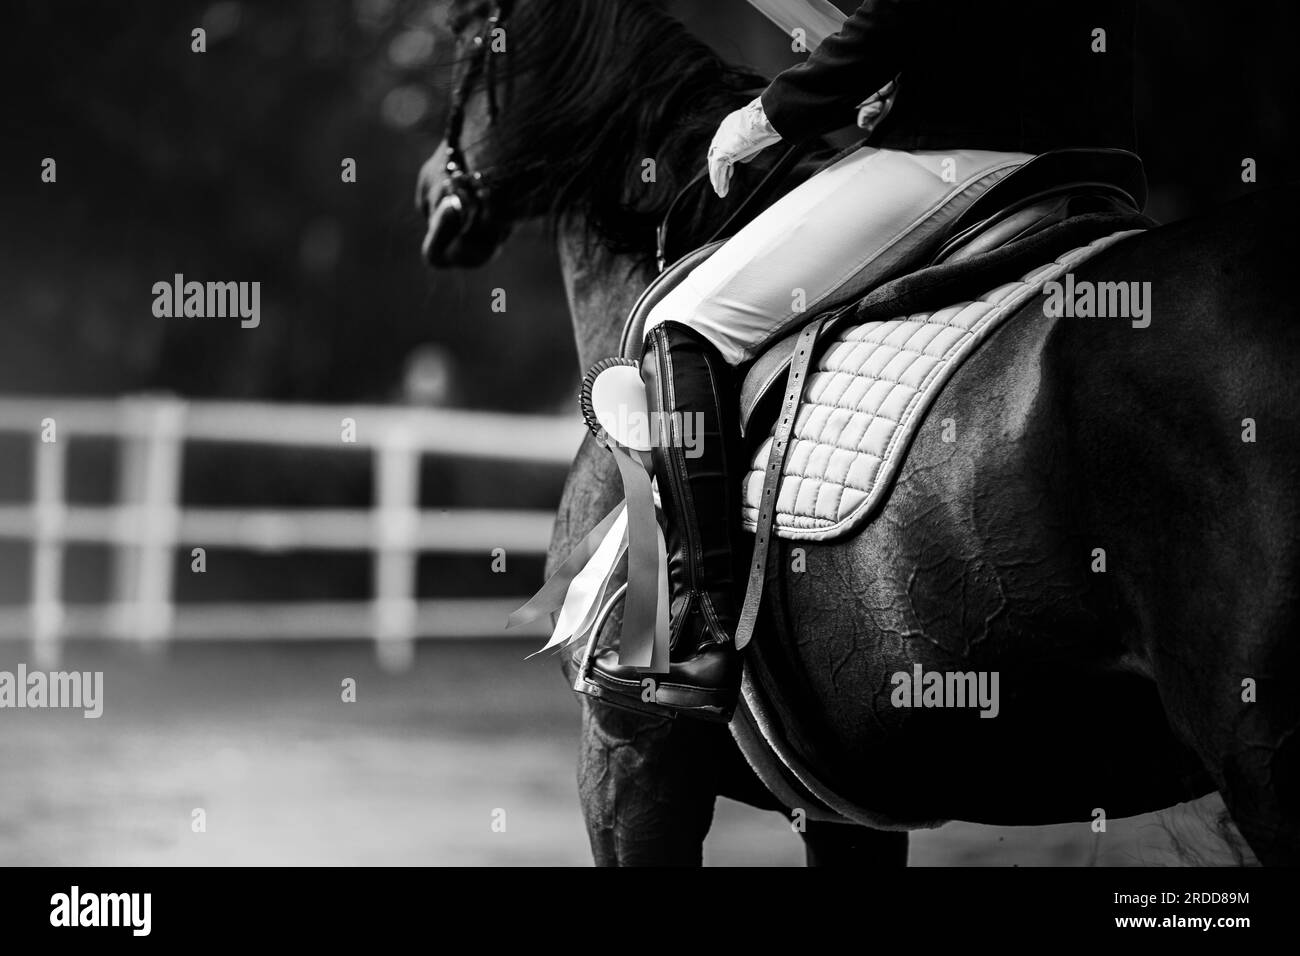 The black and white photograph depicts a horseback rider seated in the saddle atop a horse. Equestrian sports and horse riding. Stock Photo